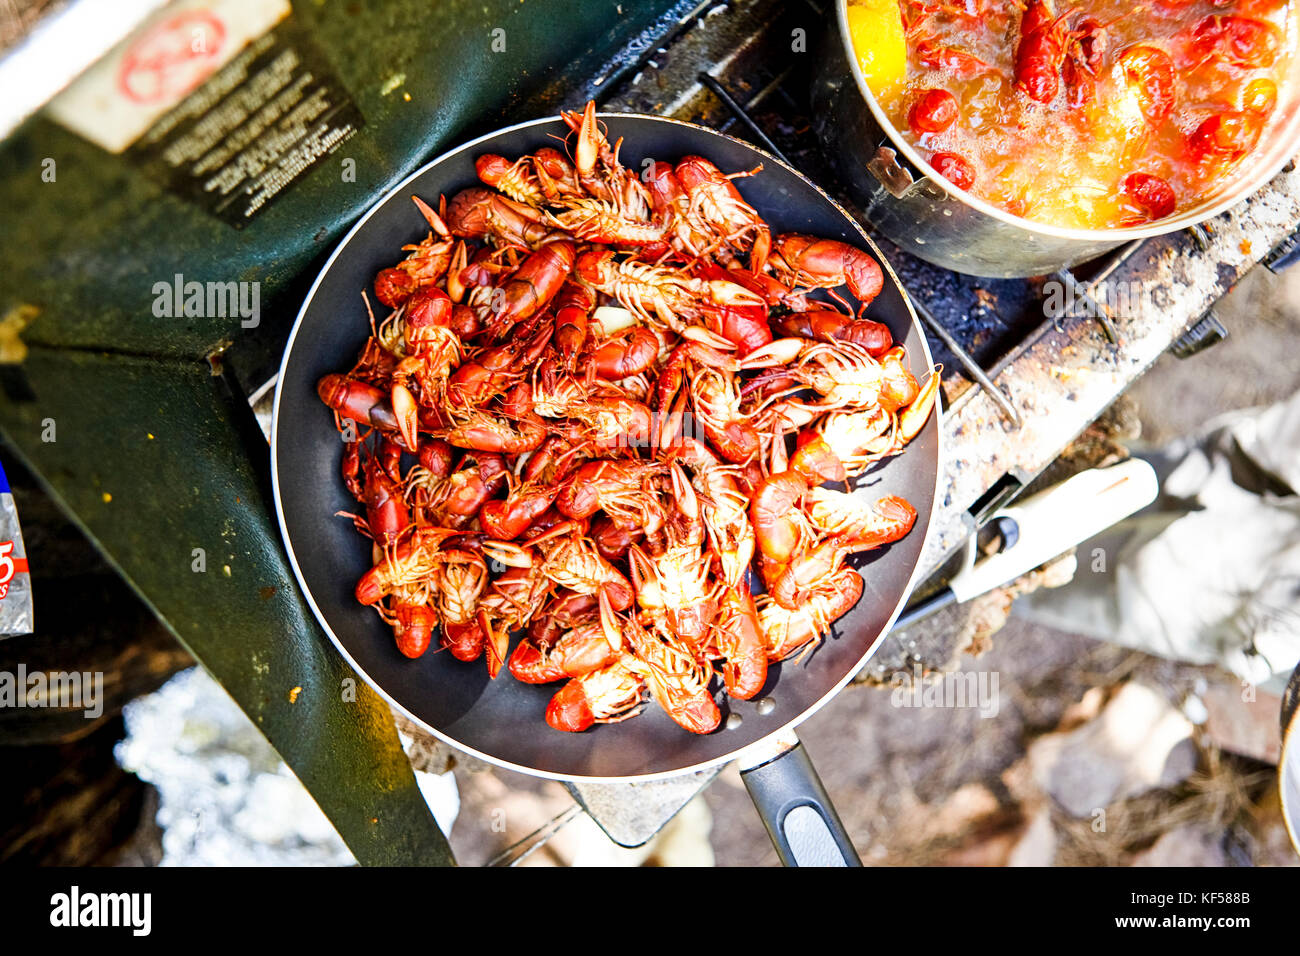 High angle view of seafood being cooked on frying pan Stock Photo